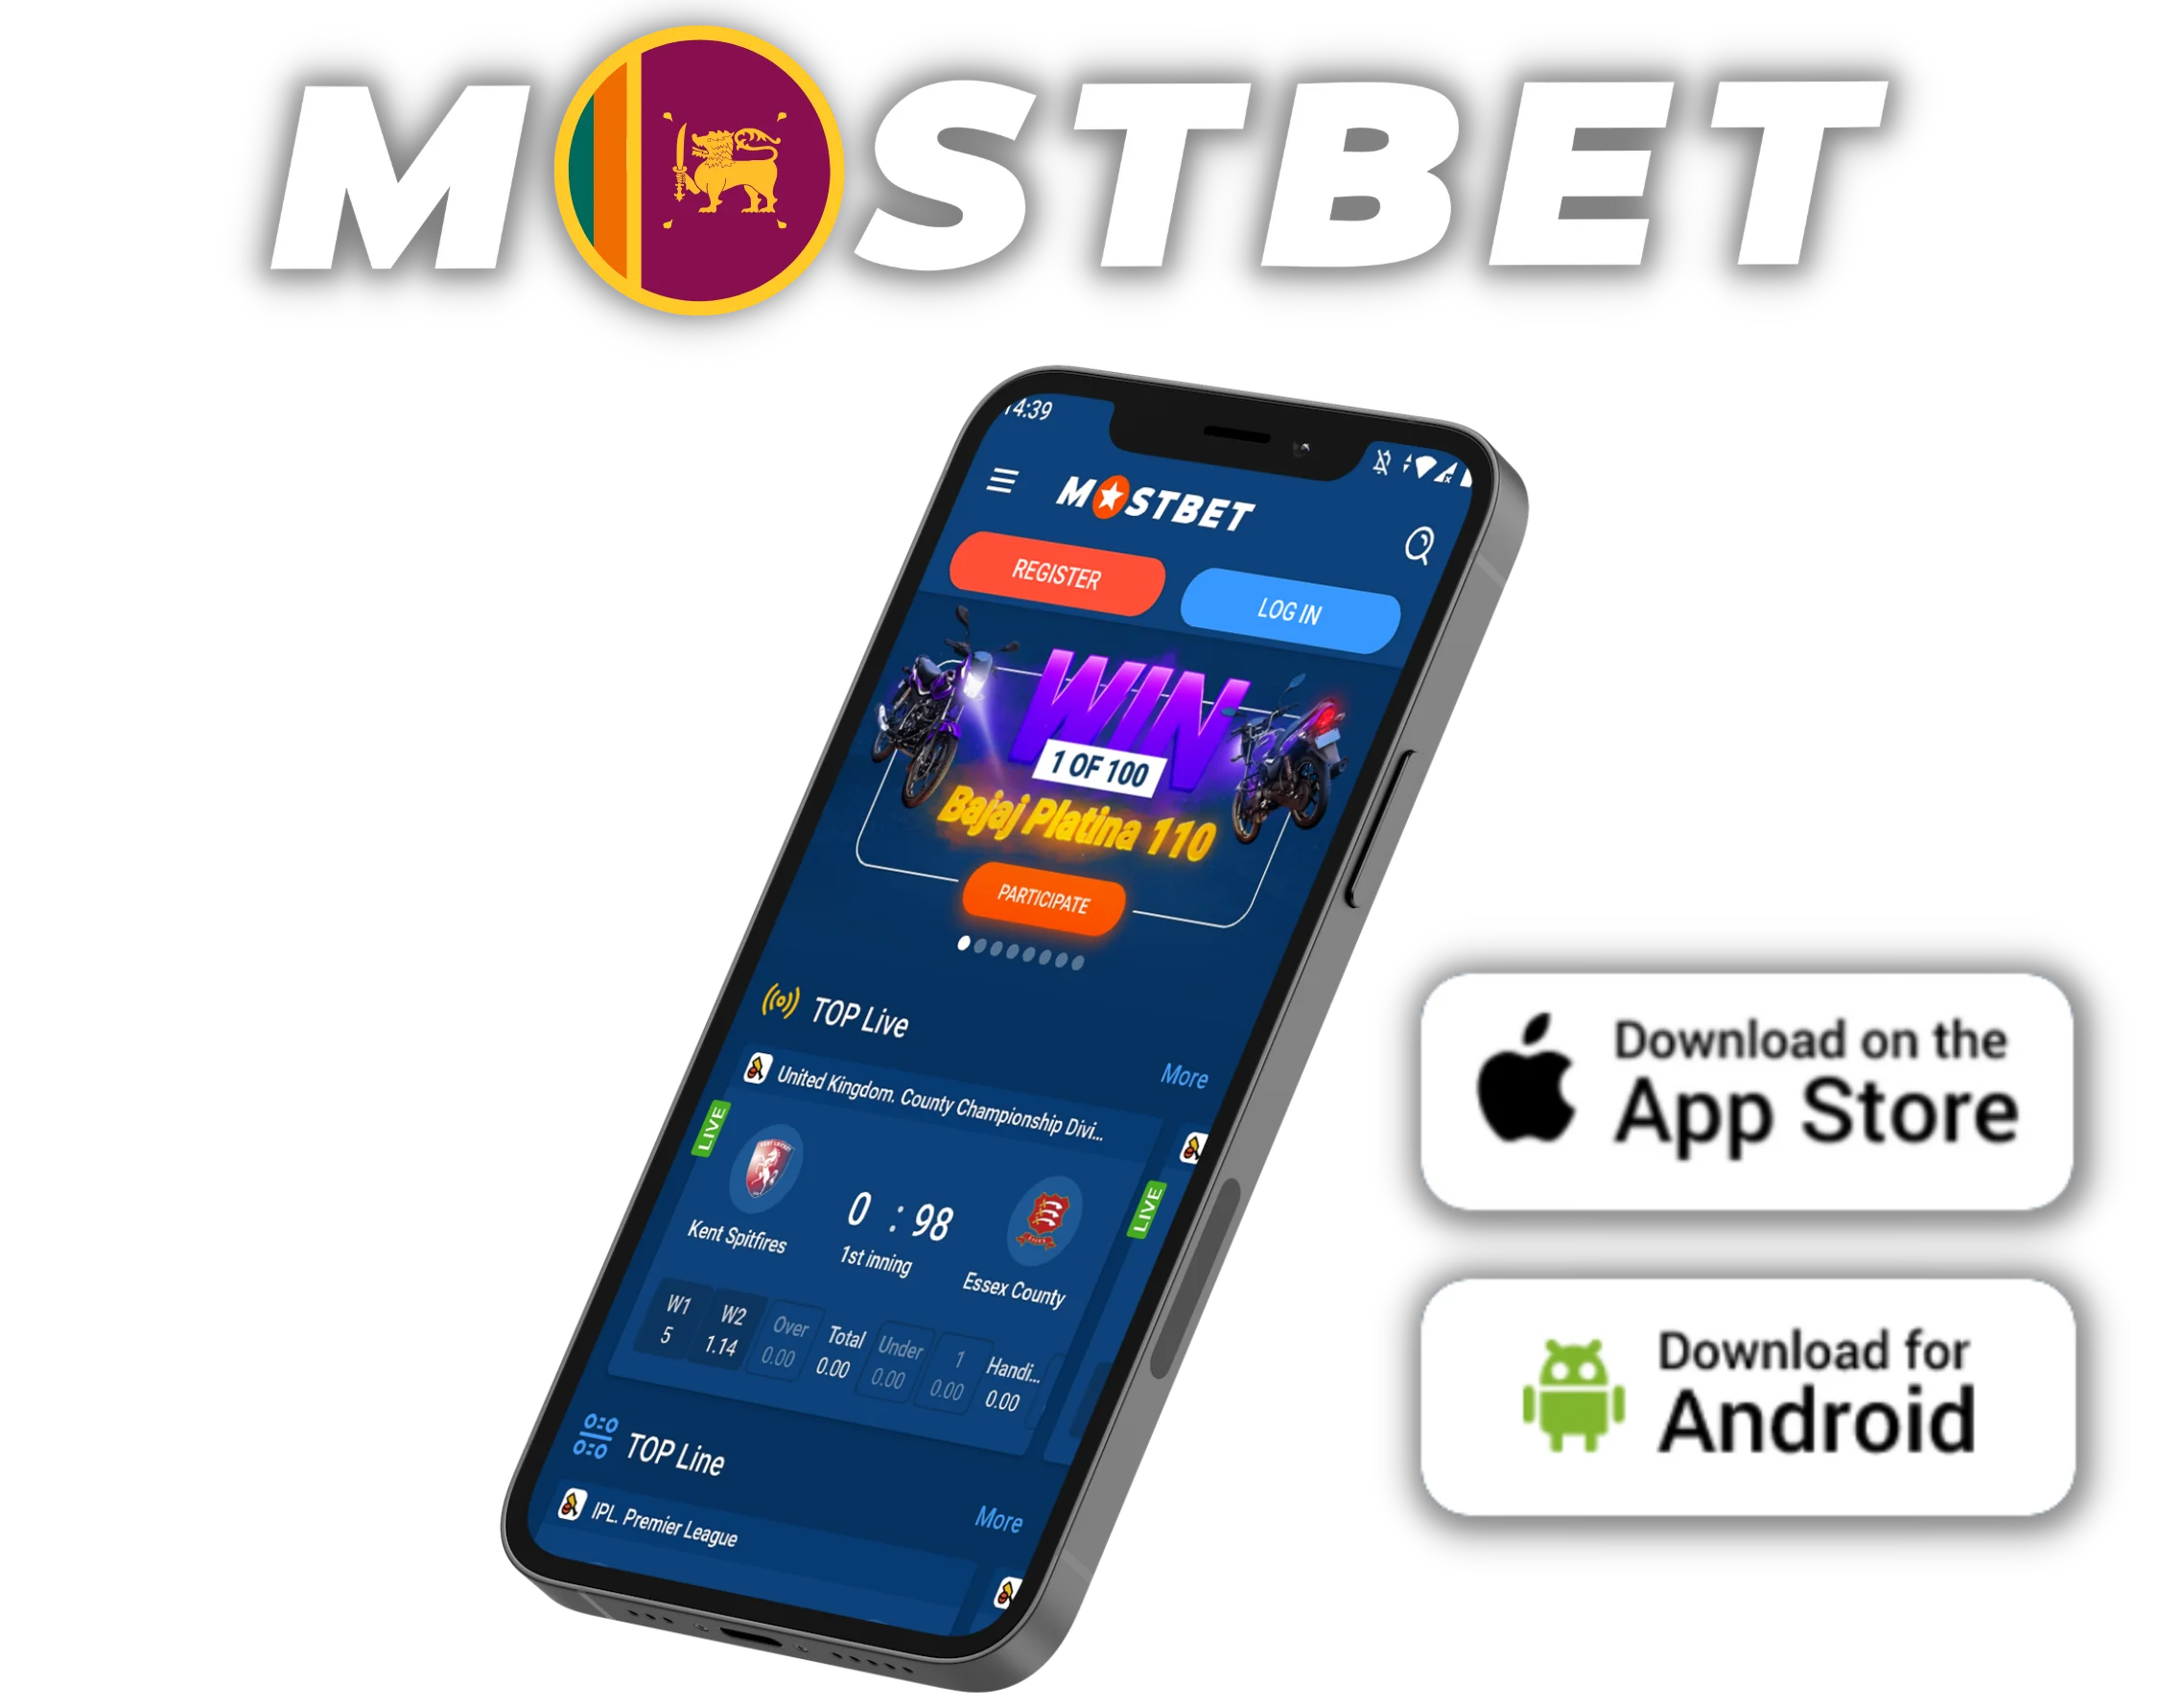 Learn Exactly How We Made Mostbet AZ 90 Bookmaker and Casino in Azerbaijan Last Month